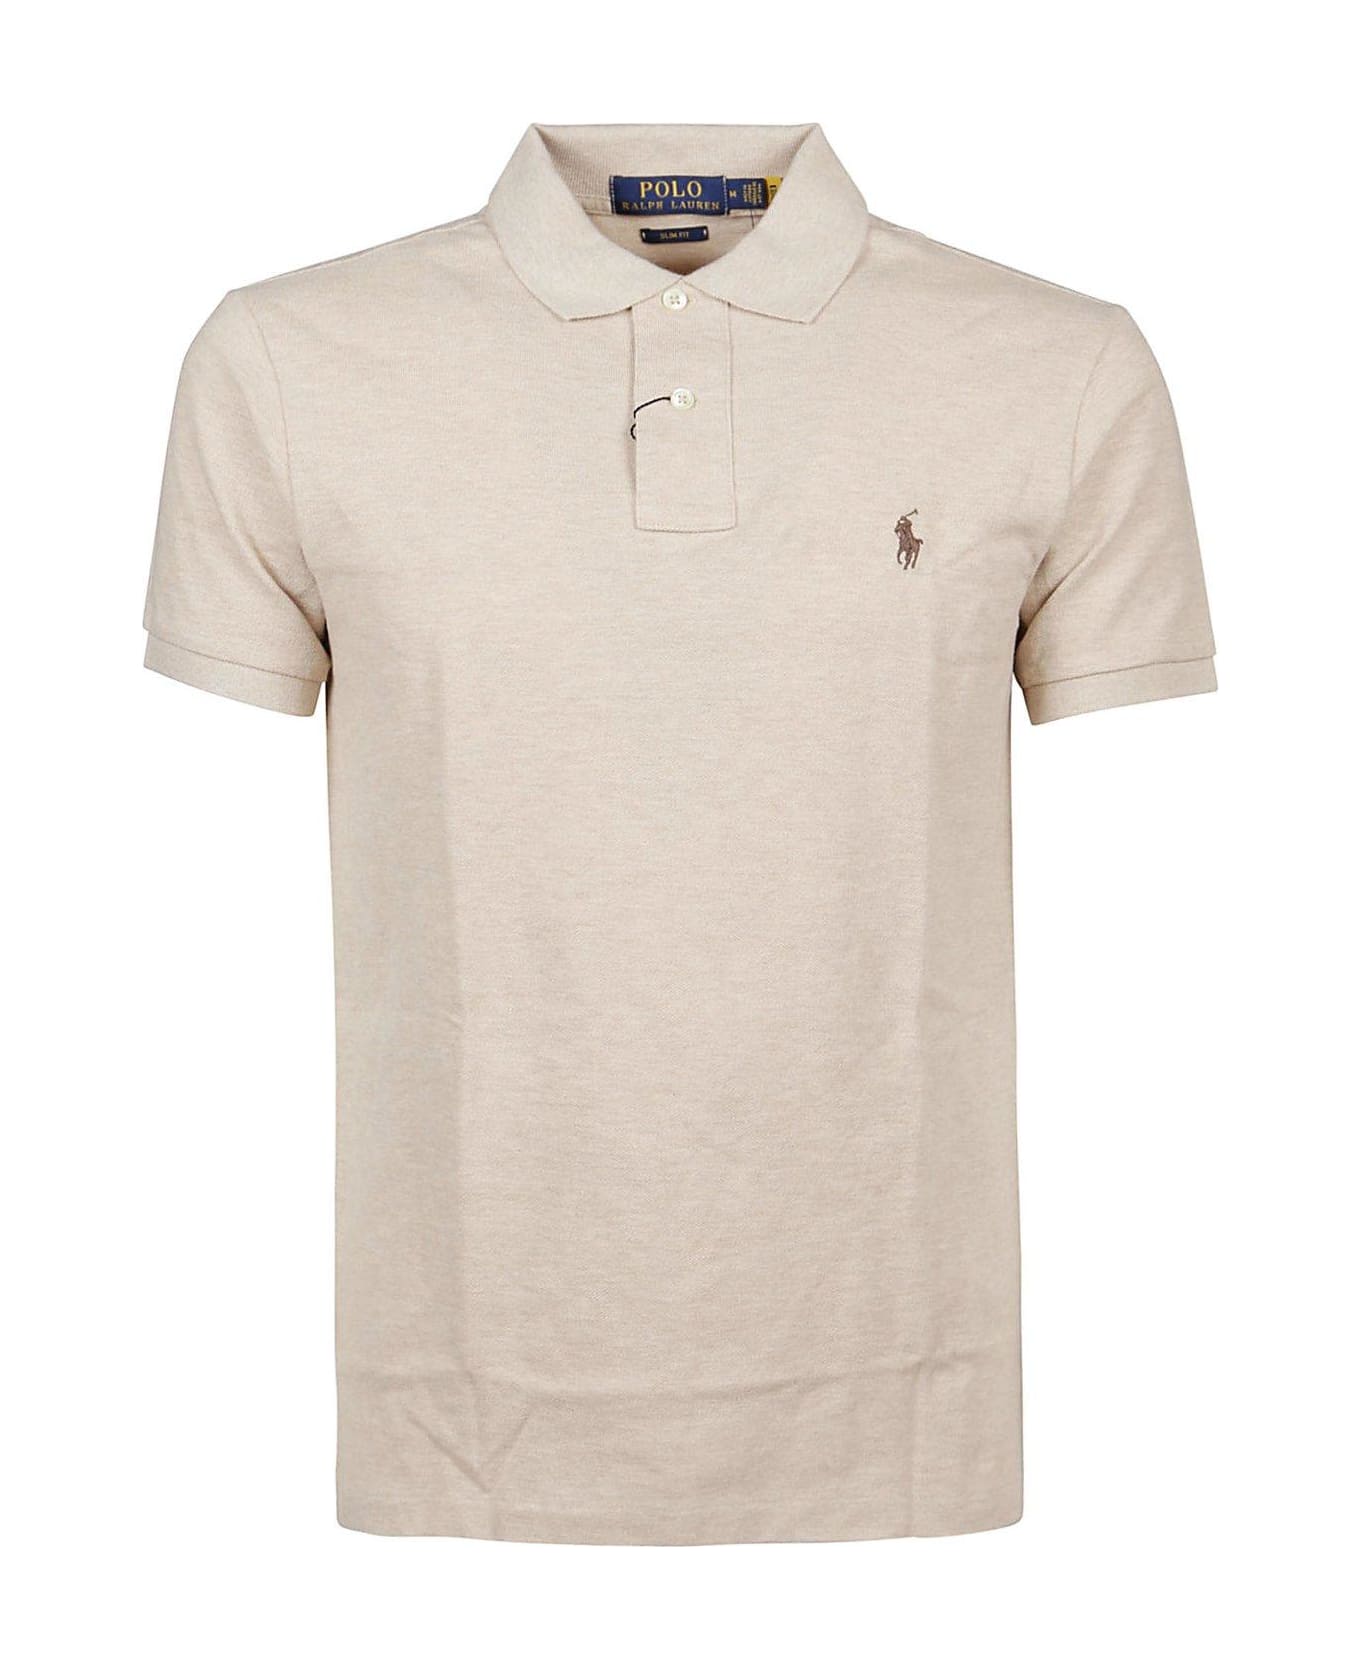 Ralph Lauren Logo Embroidered Polo Shirt - Expedition Dune Heather